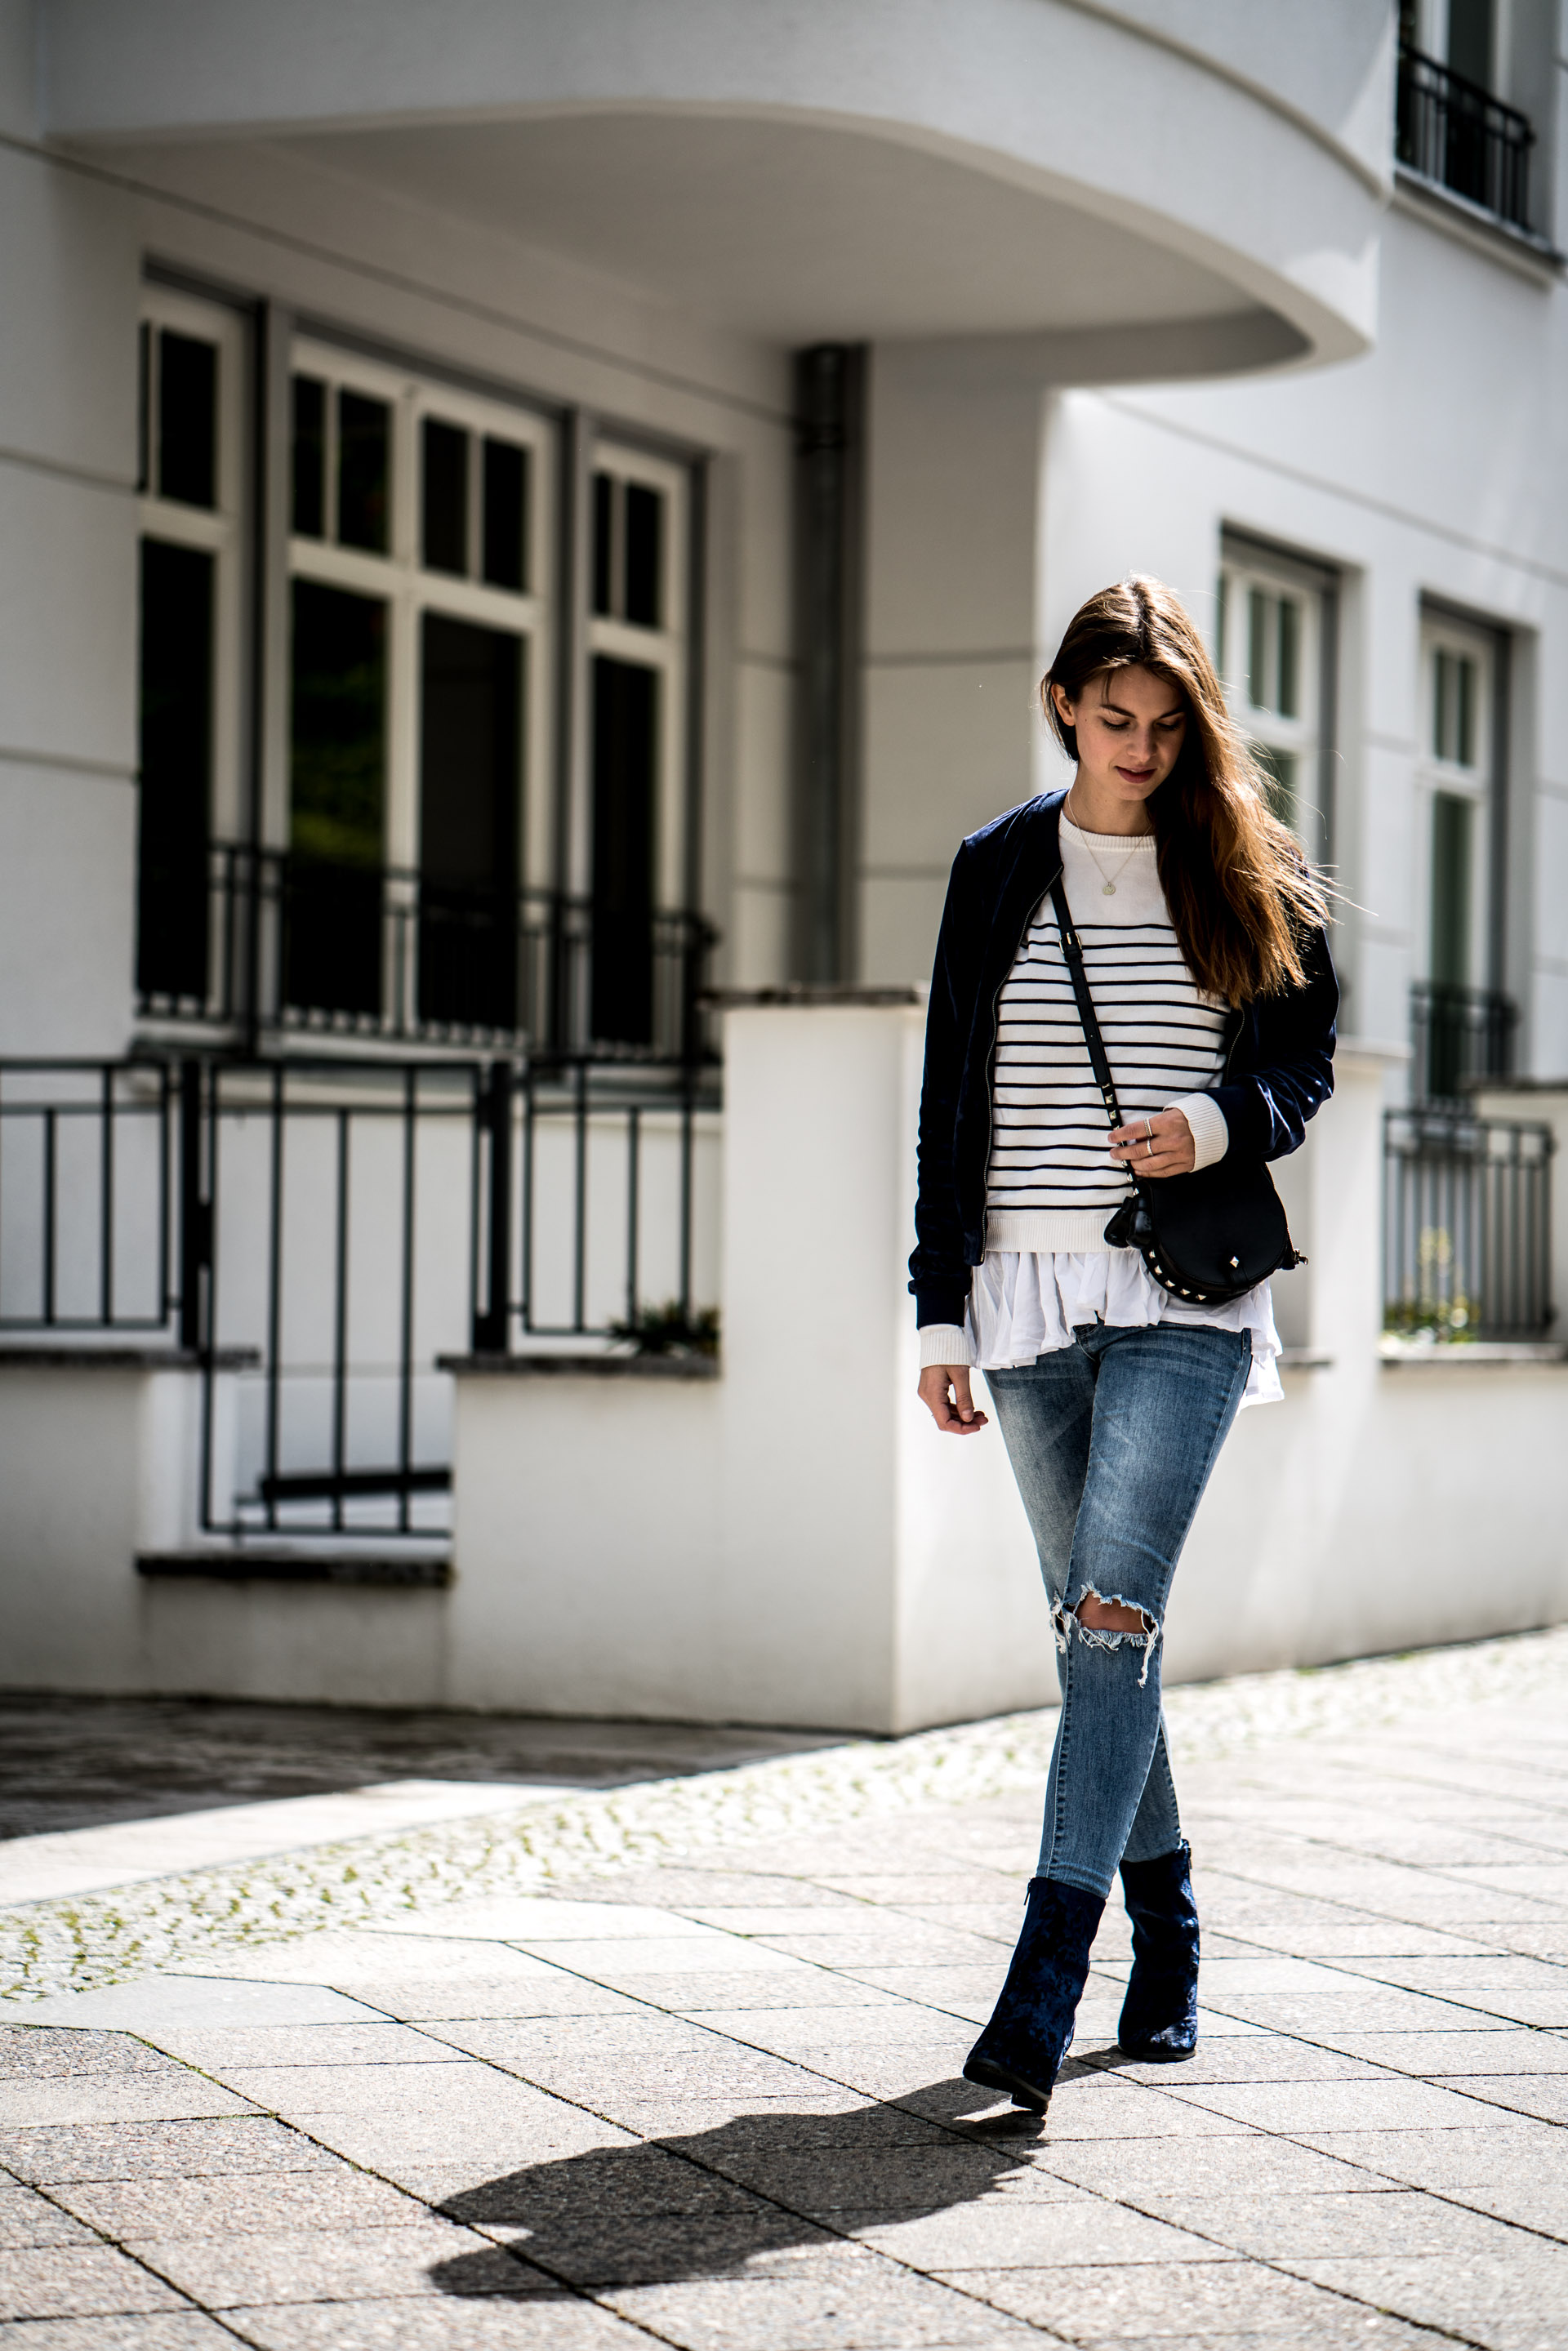 Blue Velvet Boots || What to wear in spring || Fashionblog Berlin